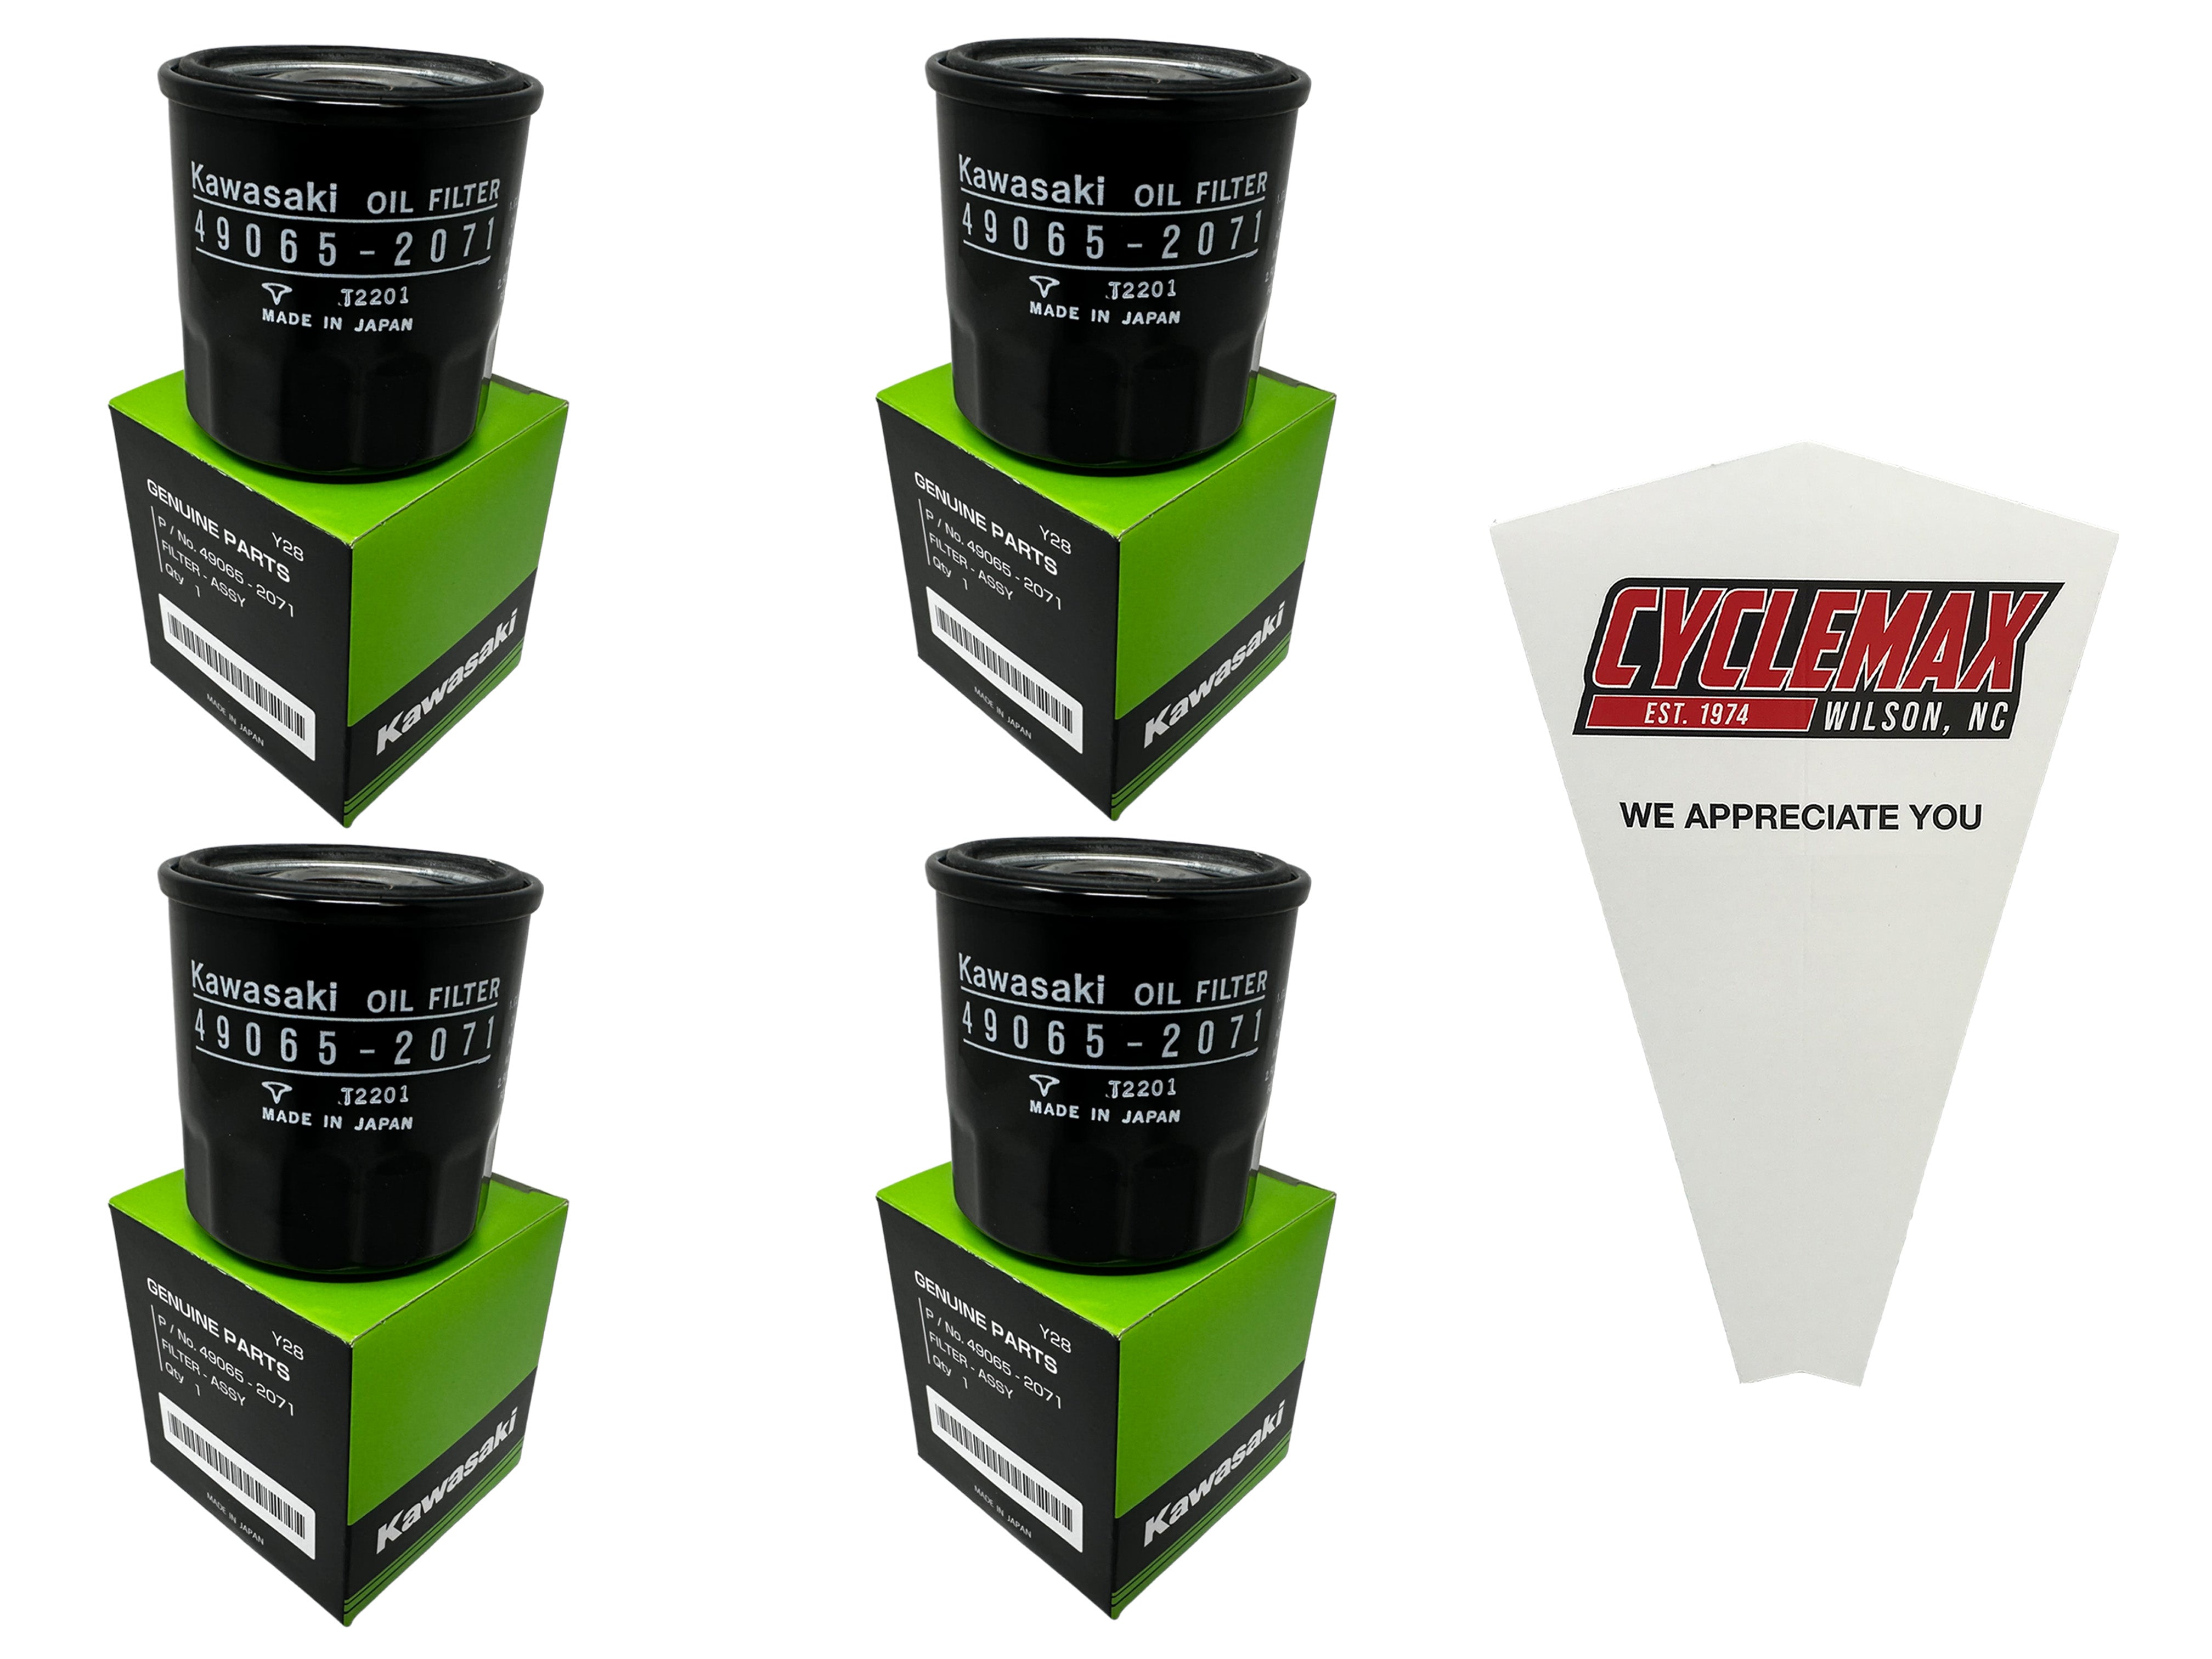 Cyclemax Four Pack for Kawasaki Oil Filter 49065-2071 Contains Four Filters and a Funnel